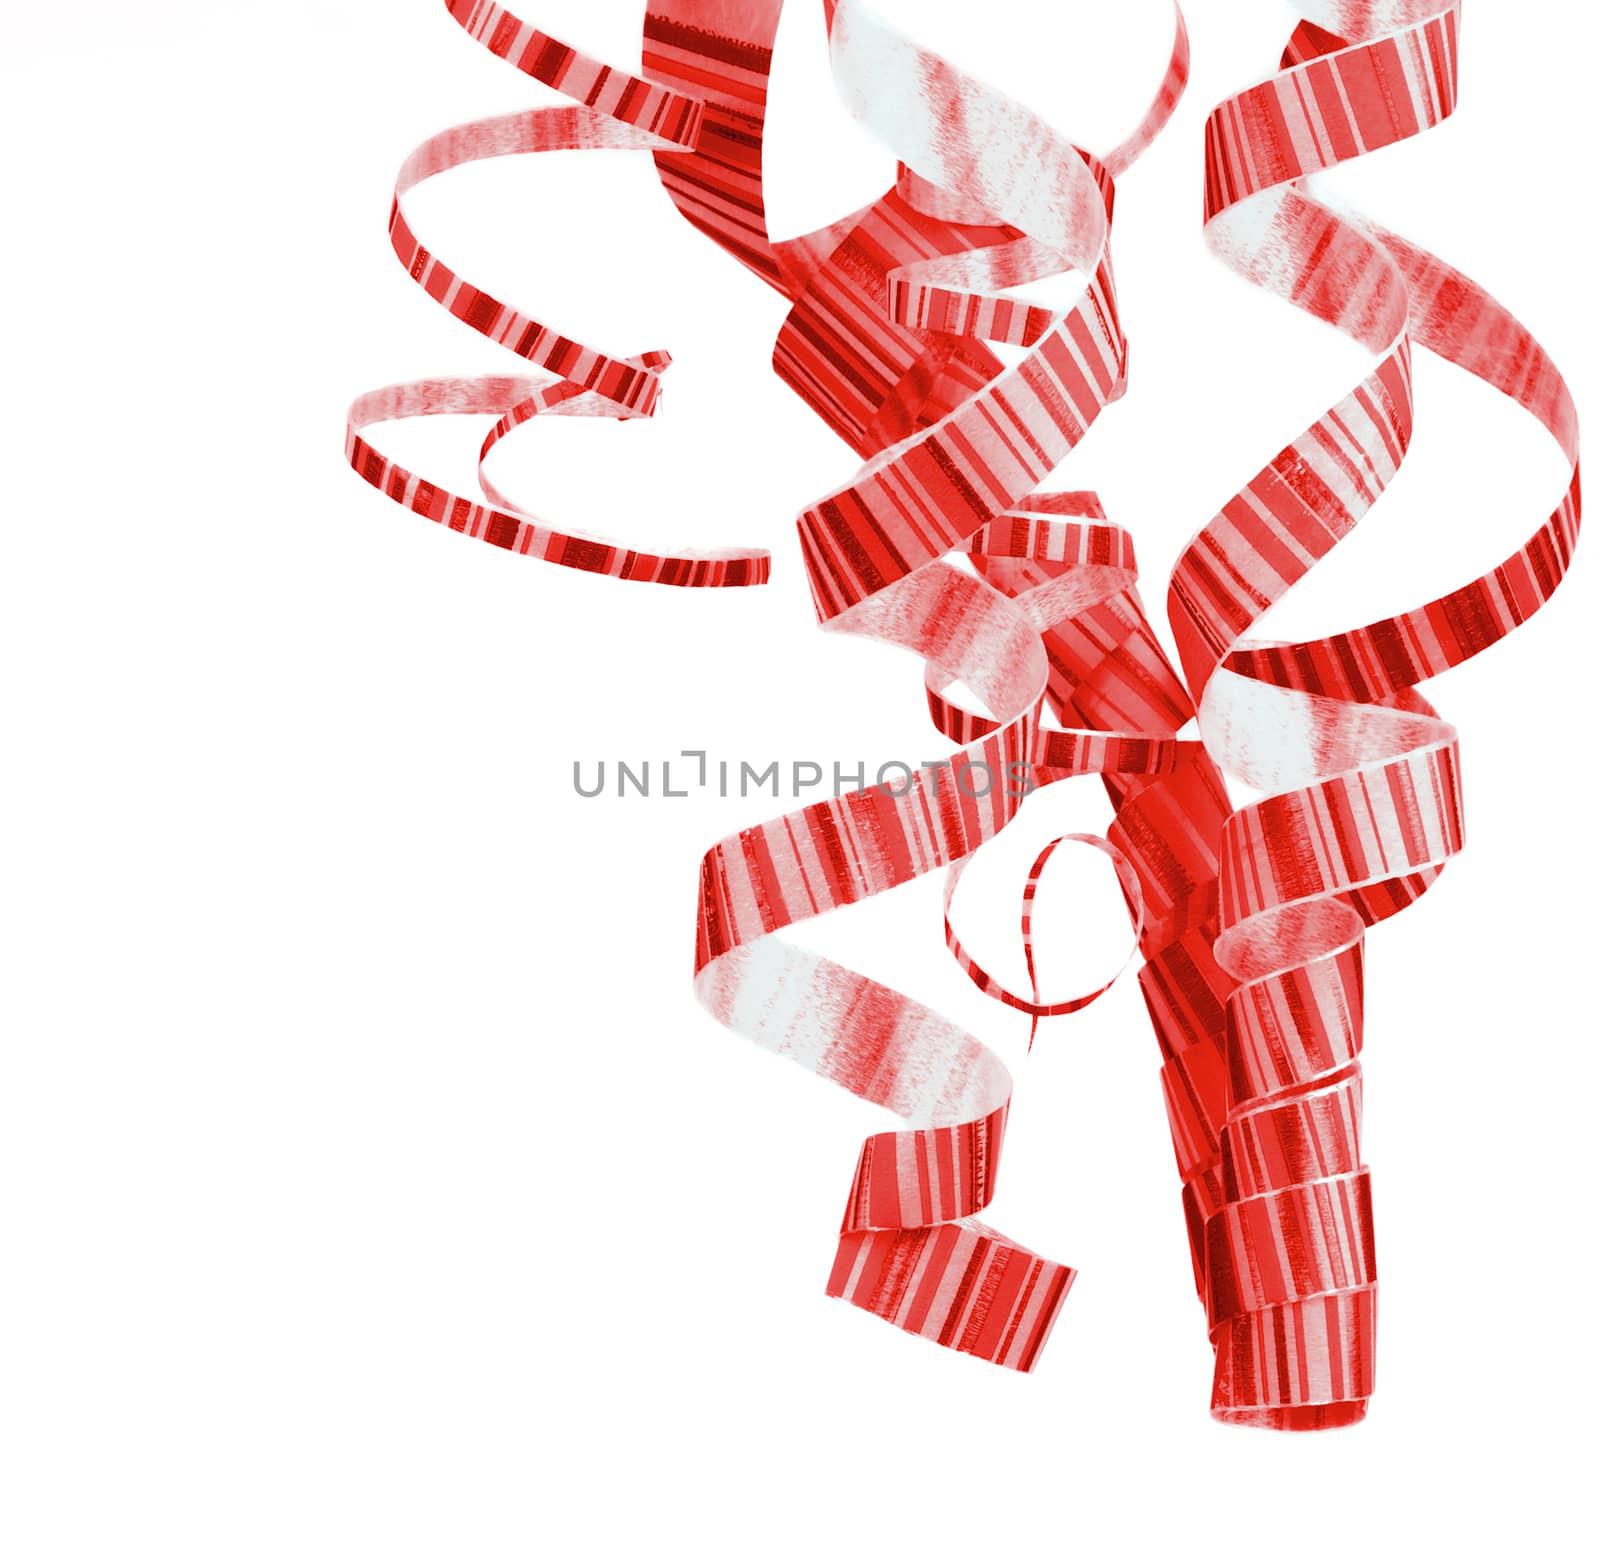 Arrangement of Striped Red Curly Hanging Party Streamers isolated on White background